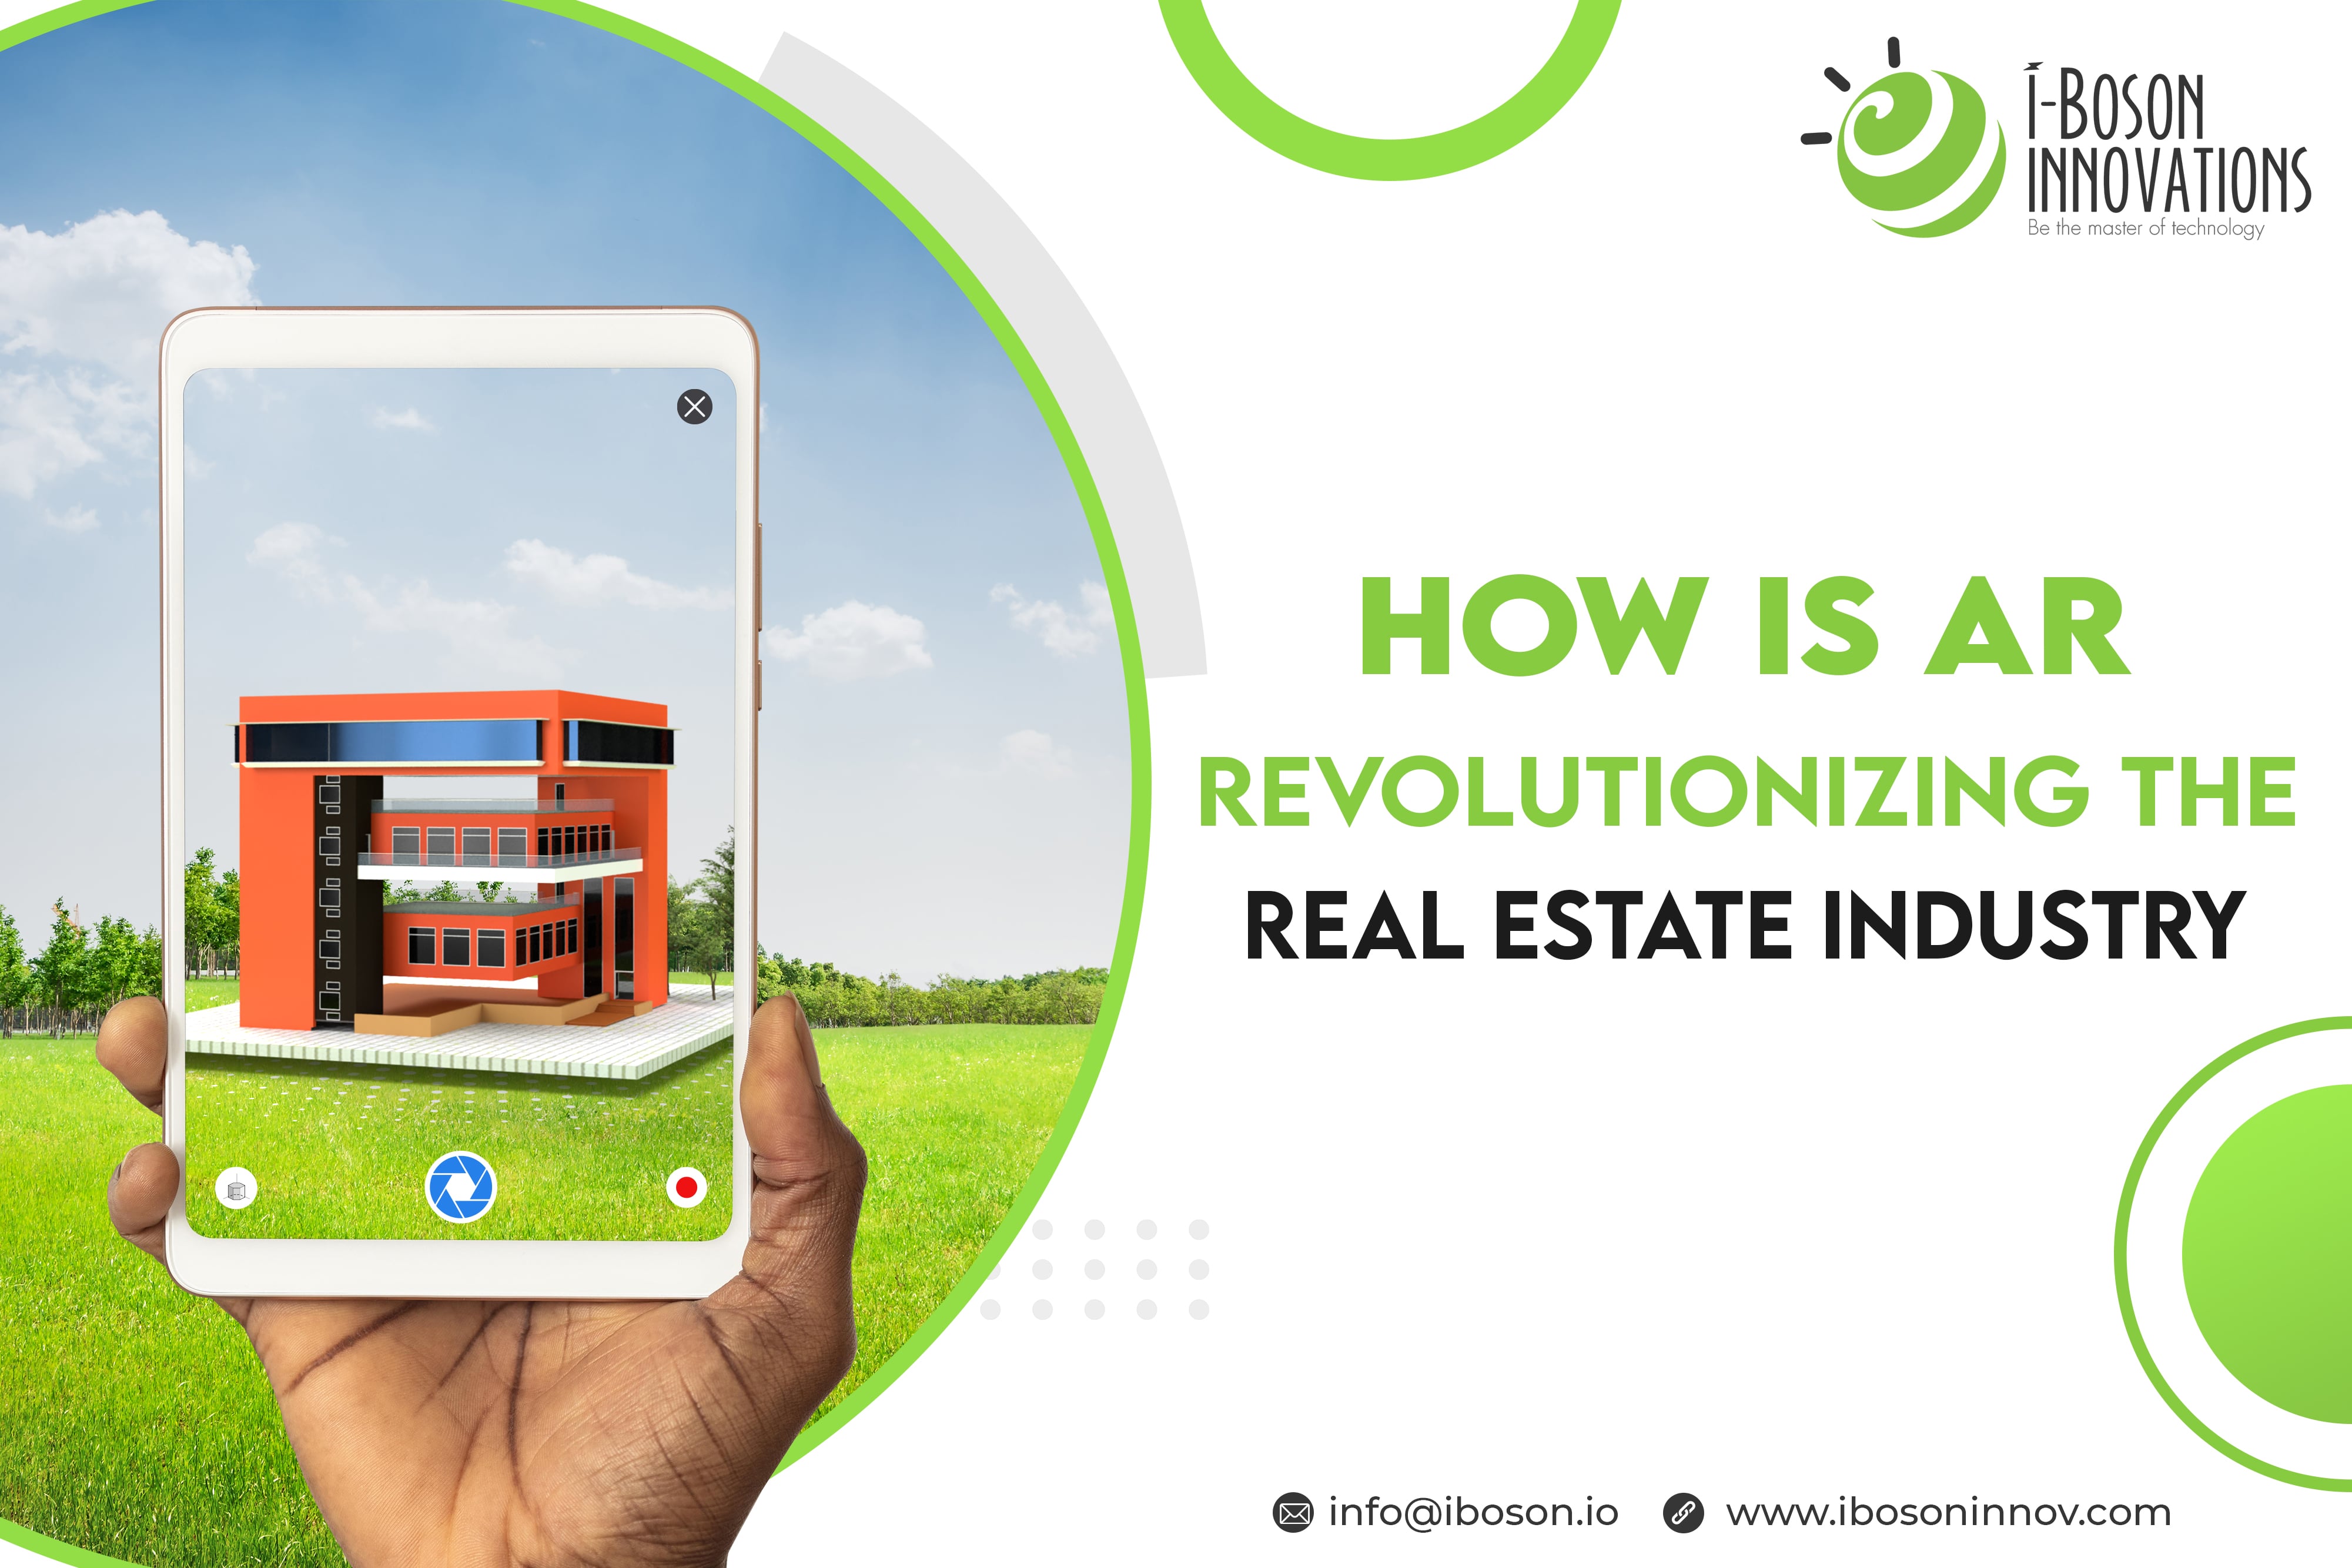 AR changing the real estate sector
                       